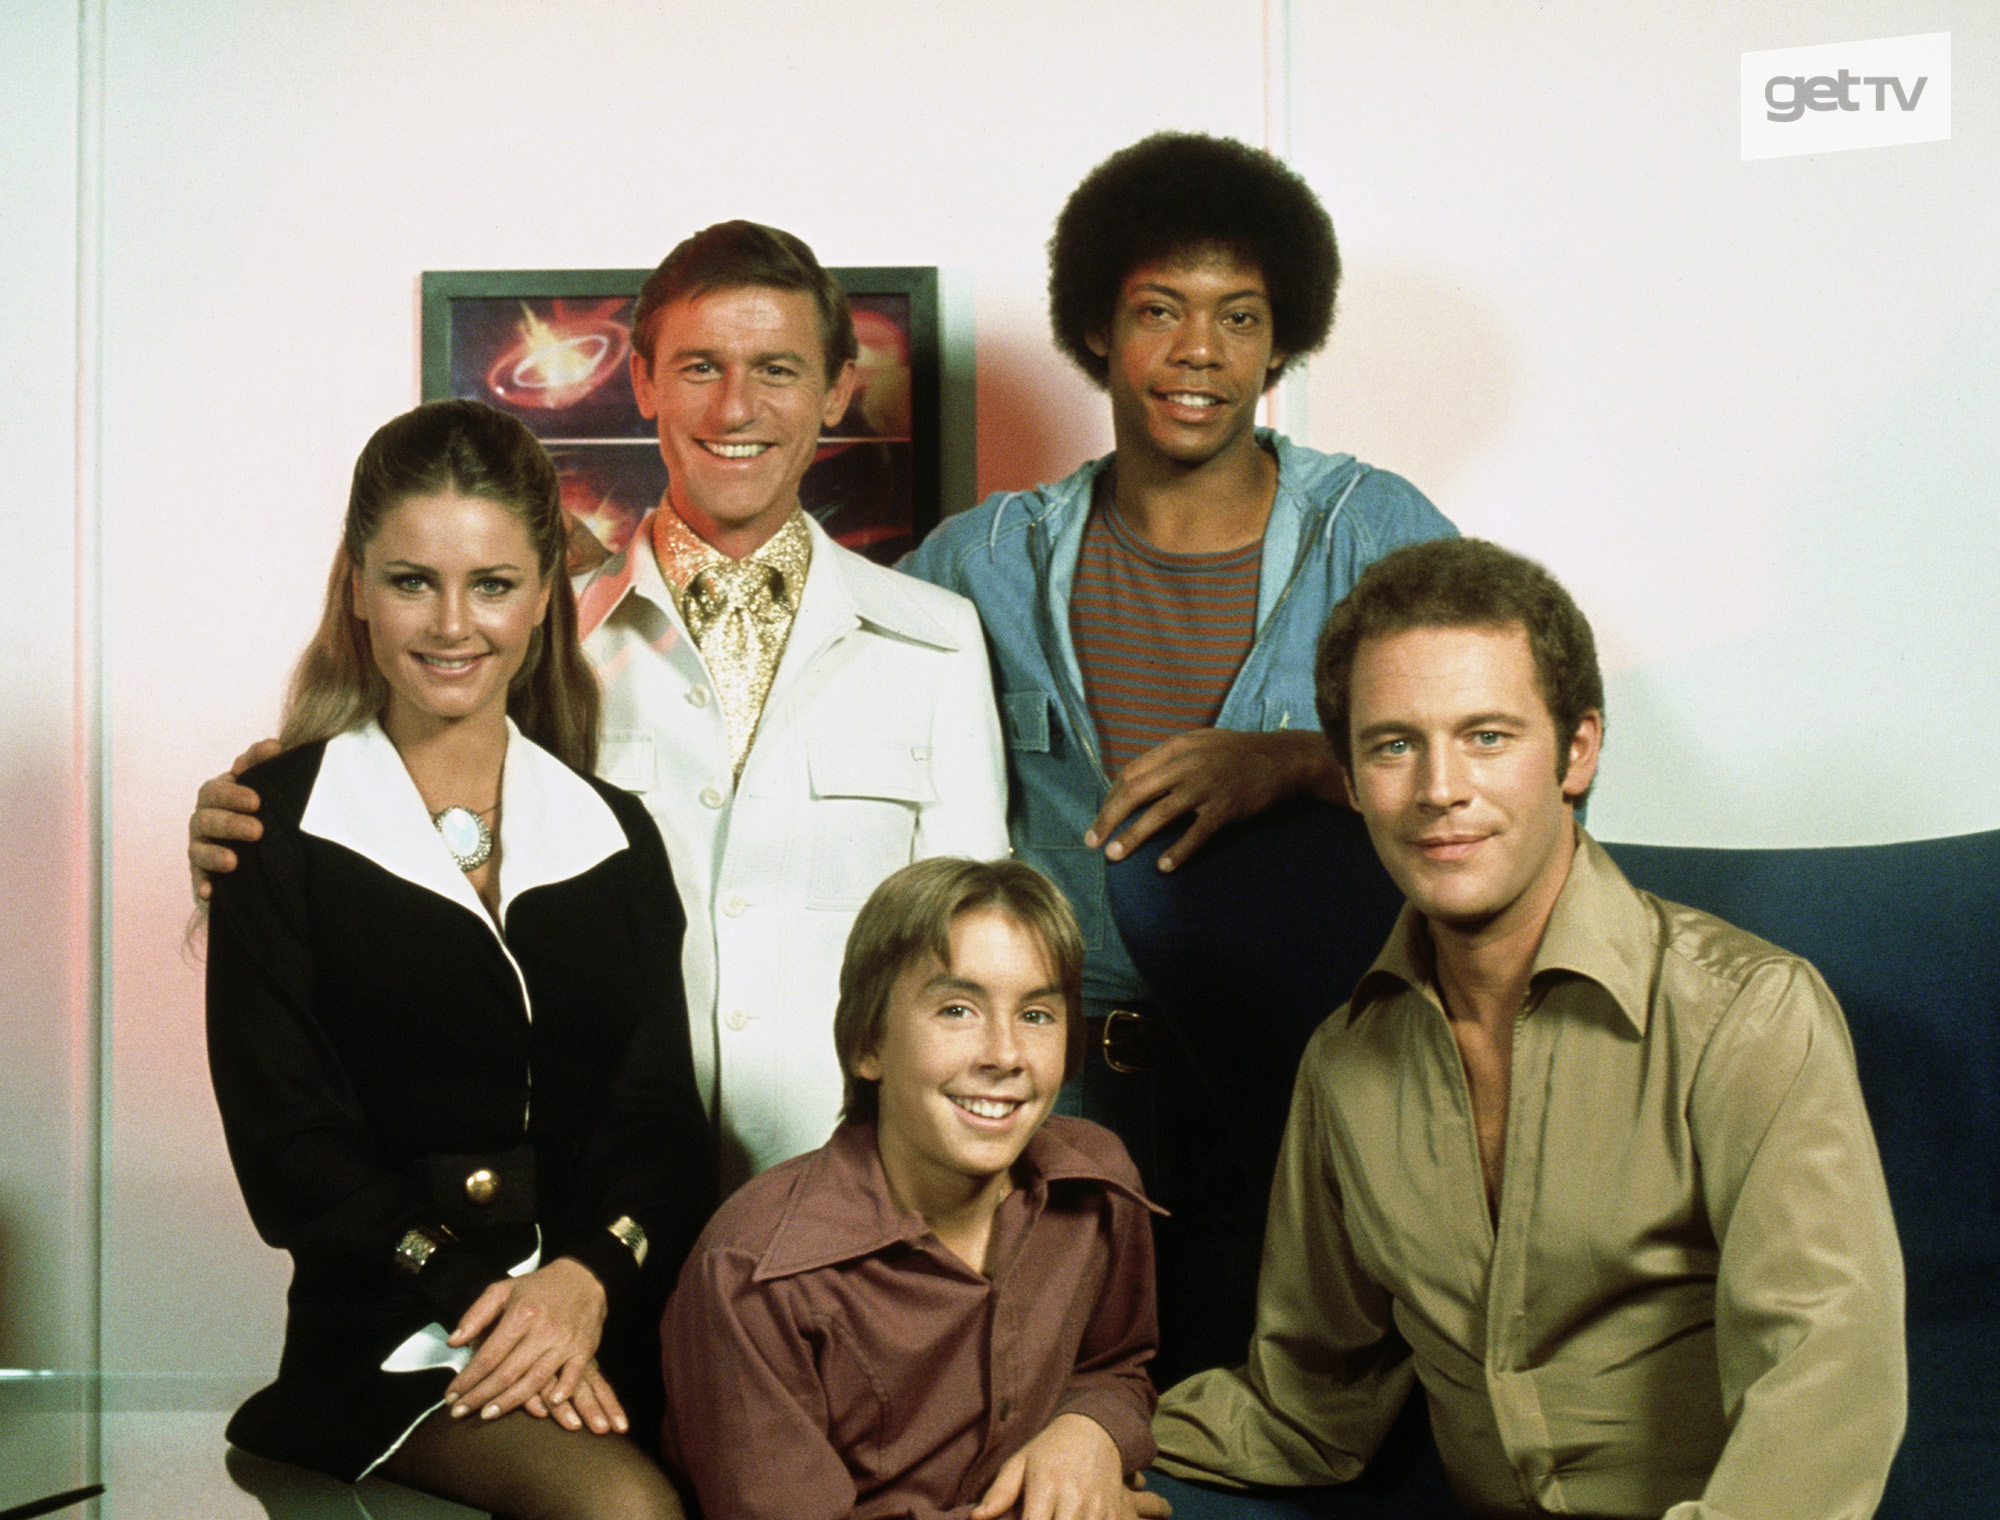 The Fantastic Journey on getTV